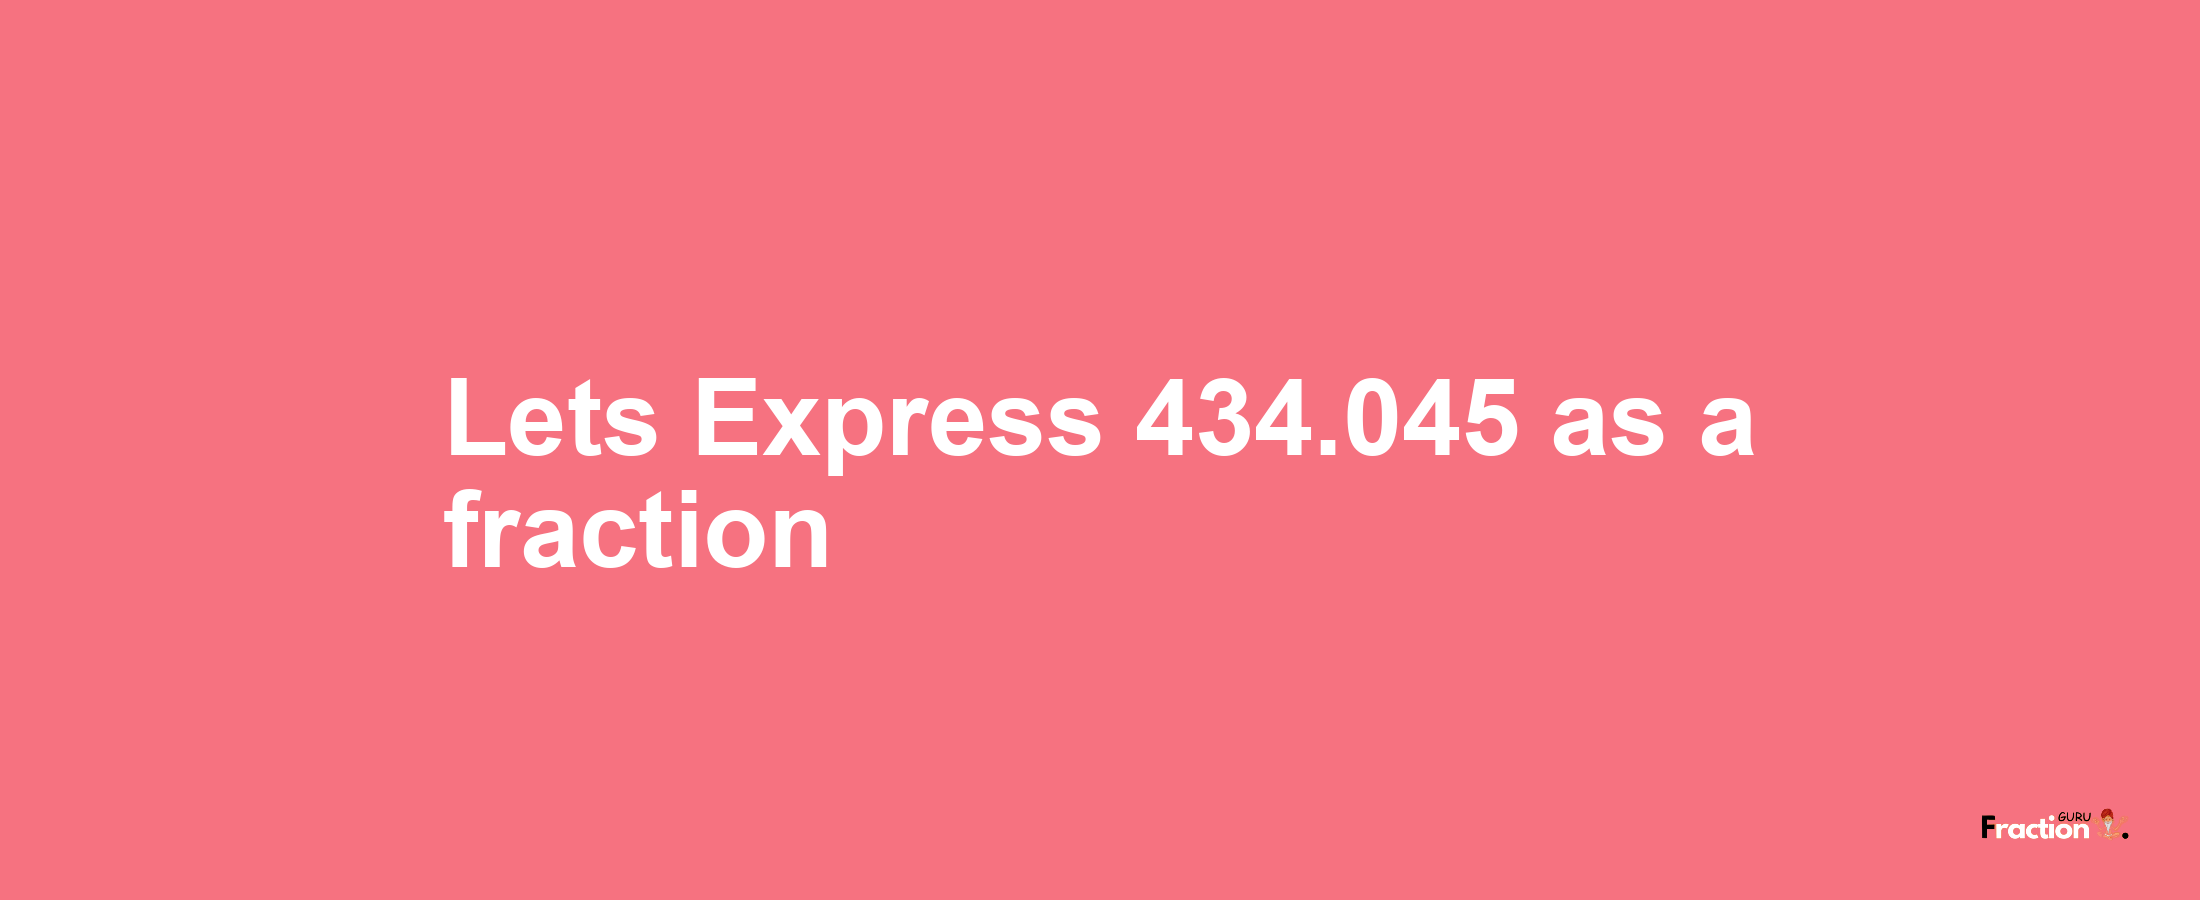 Lets Express 434.045 as afraction